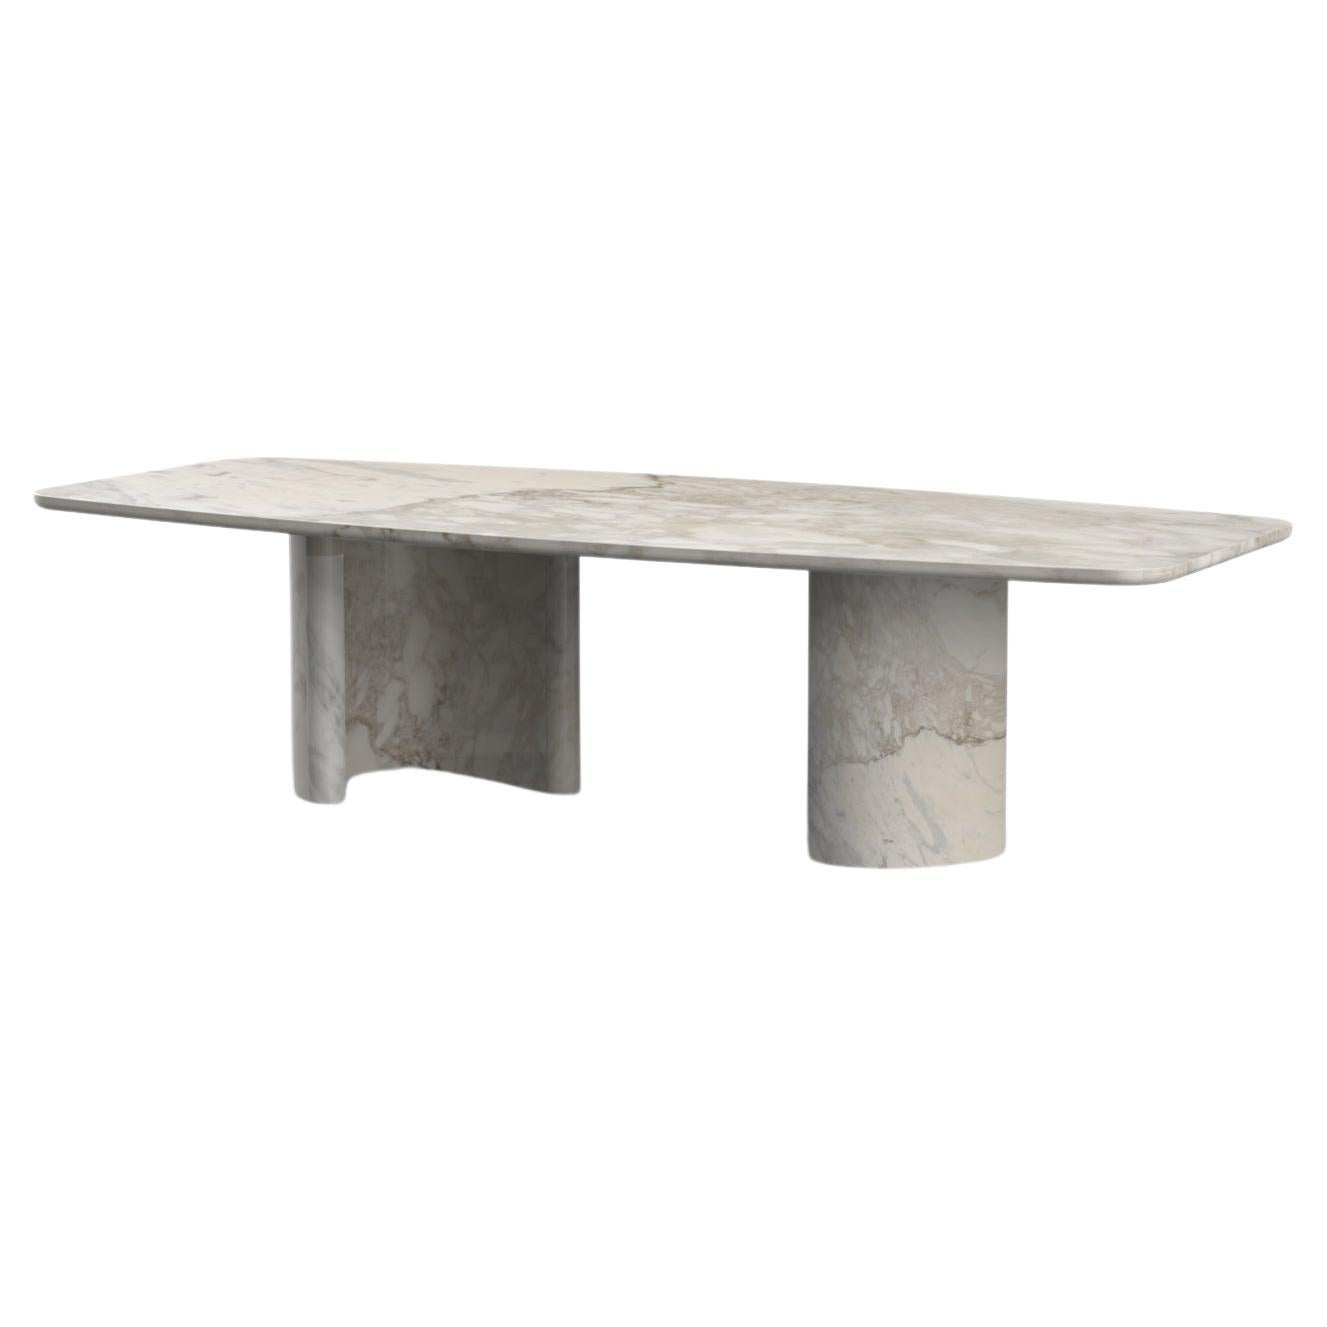 Modern C&C Dining Table Calacatta Oro Marble Handmade in Portugal by Greenapple